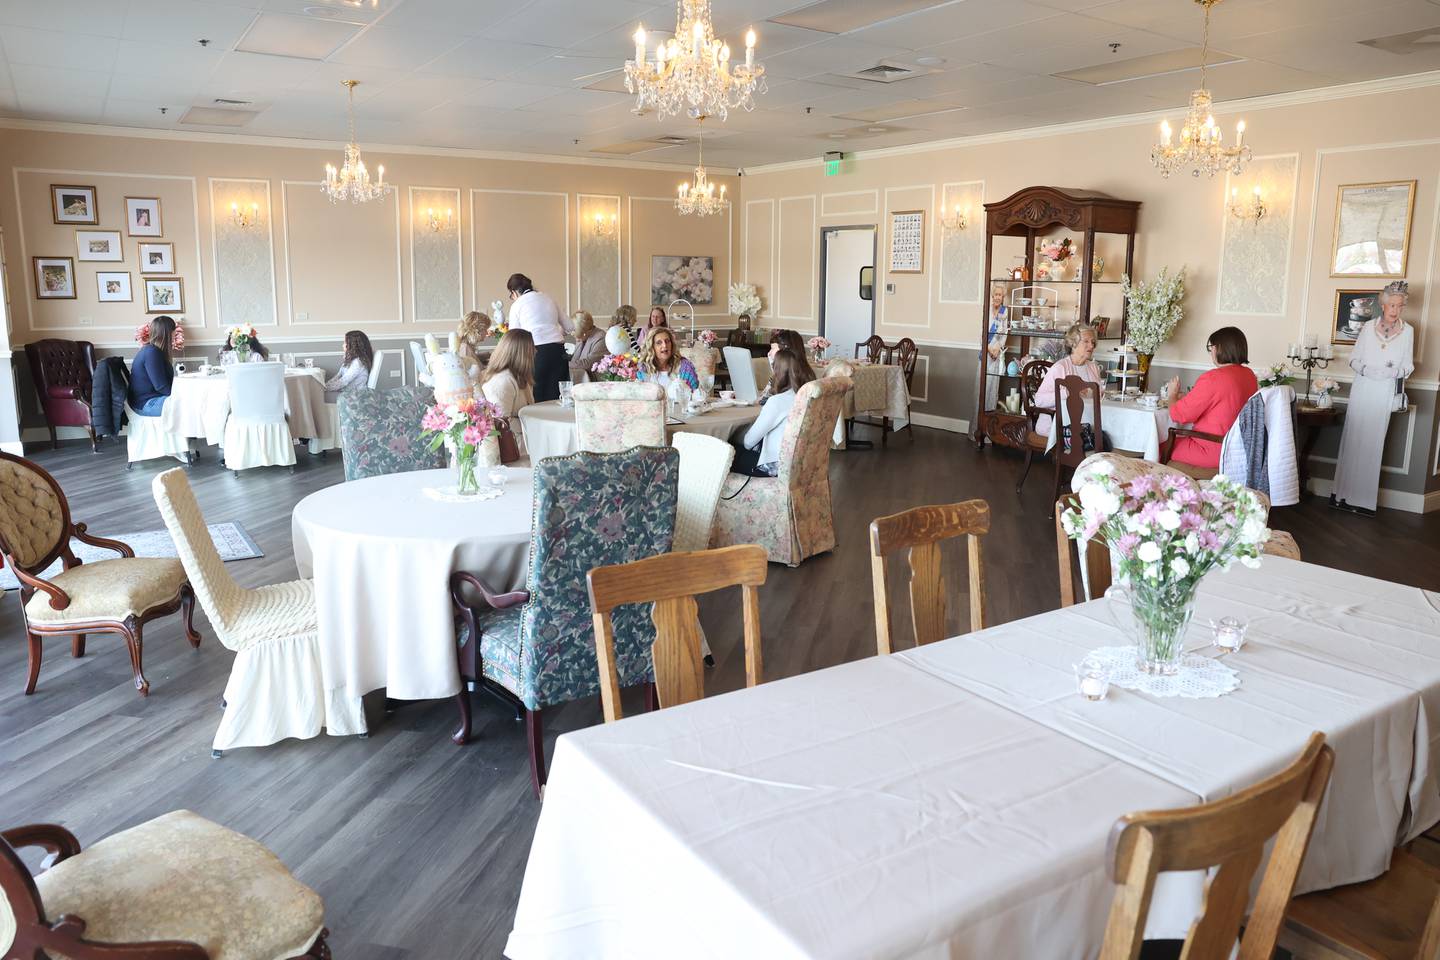 Custumers enjoy an elegant afternoon of tea and desserts at the Royal Tea Room on Friday, March 29, 2024 in Shorewood.